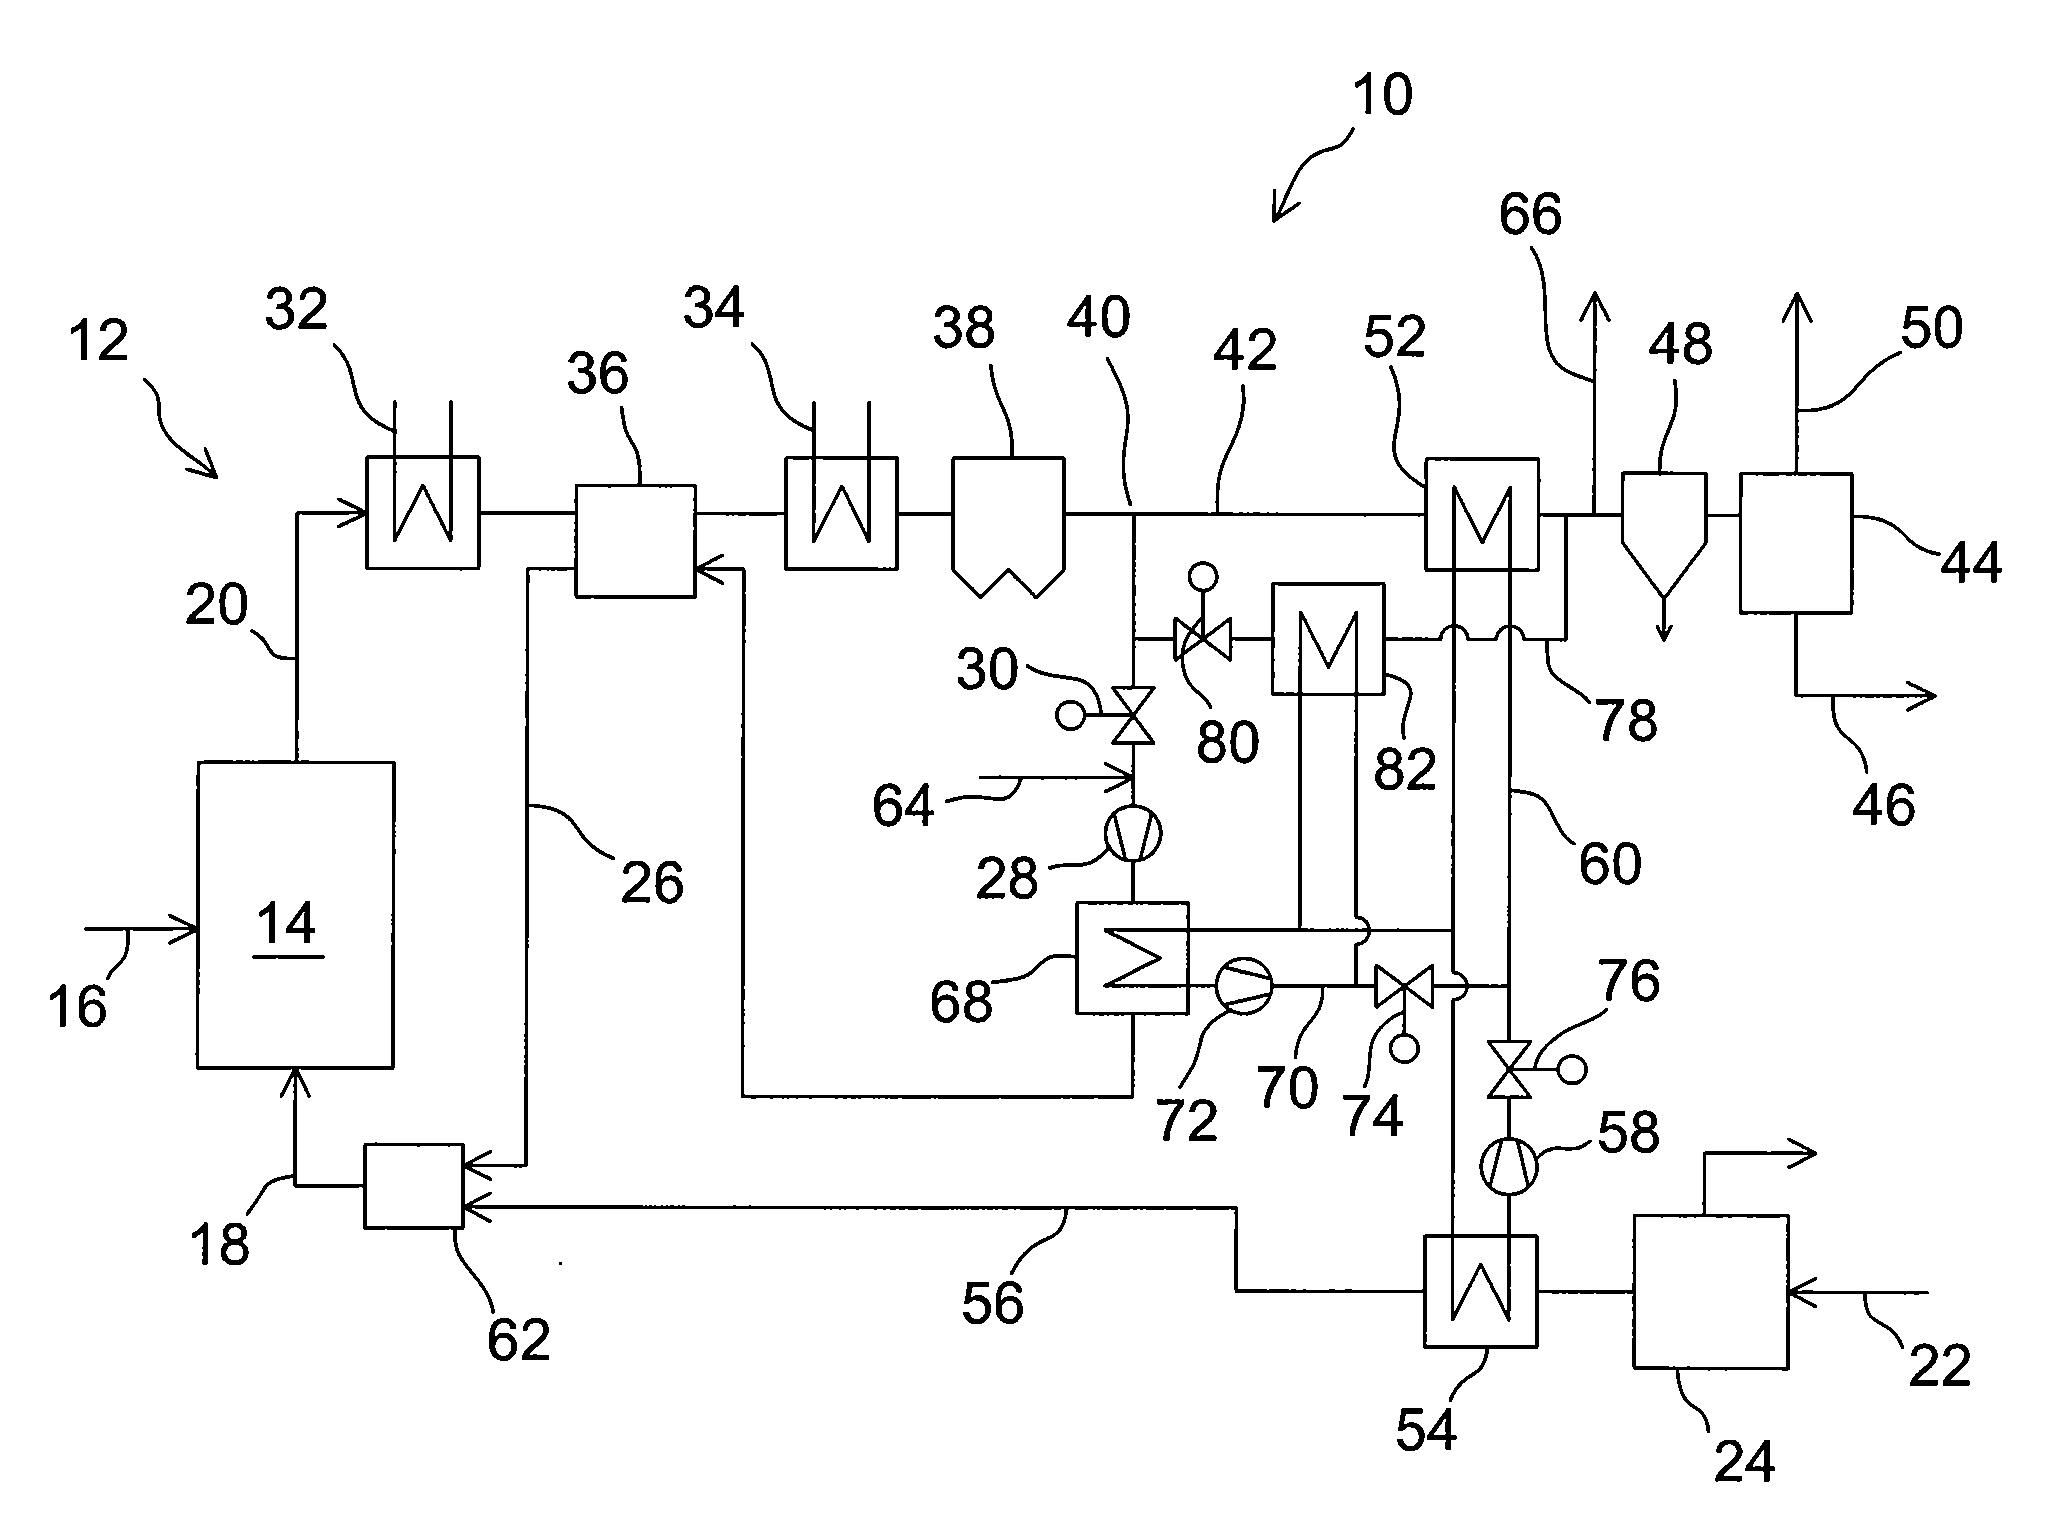 Method of and system for generating power by oxyfuel combustion